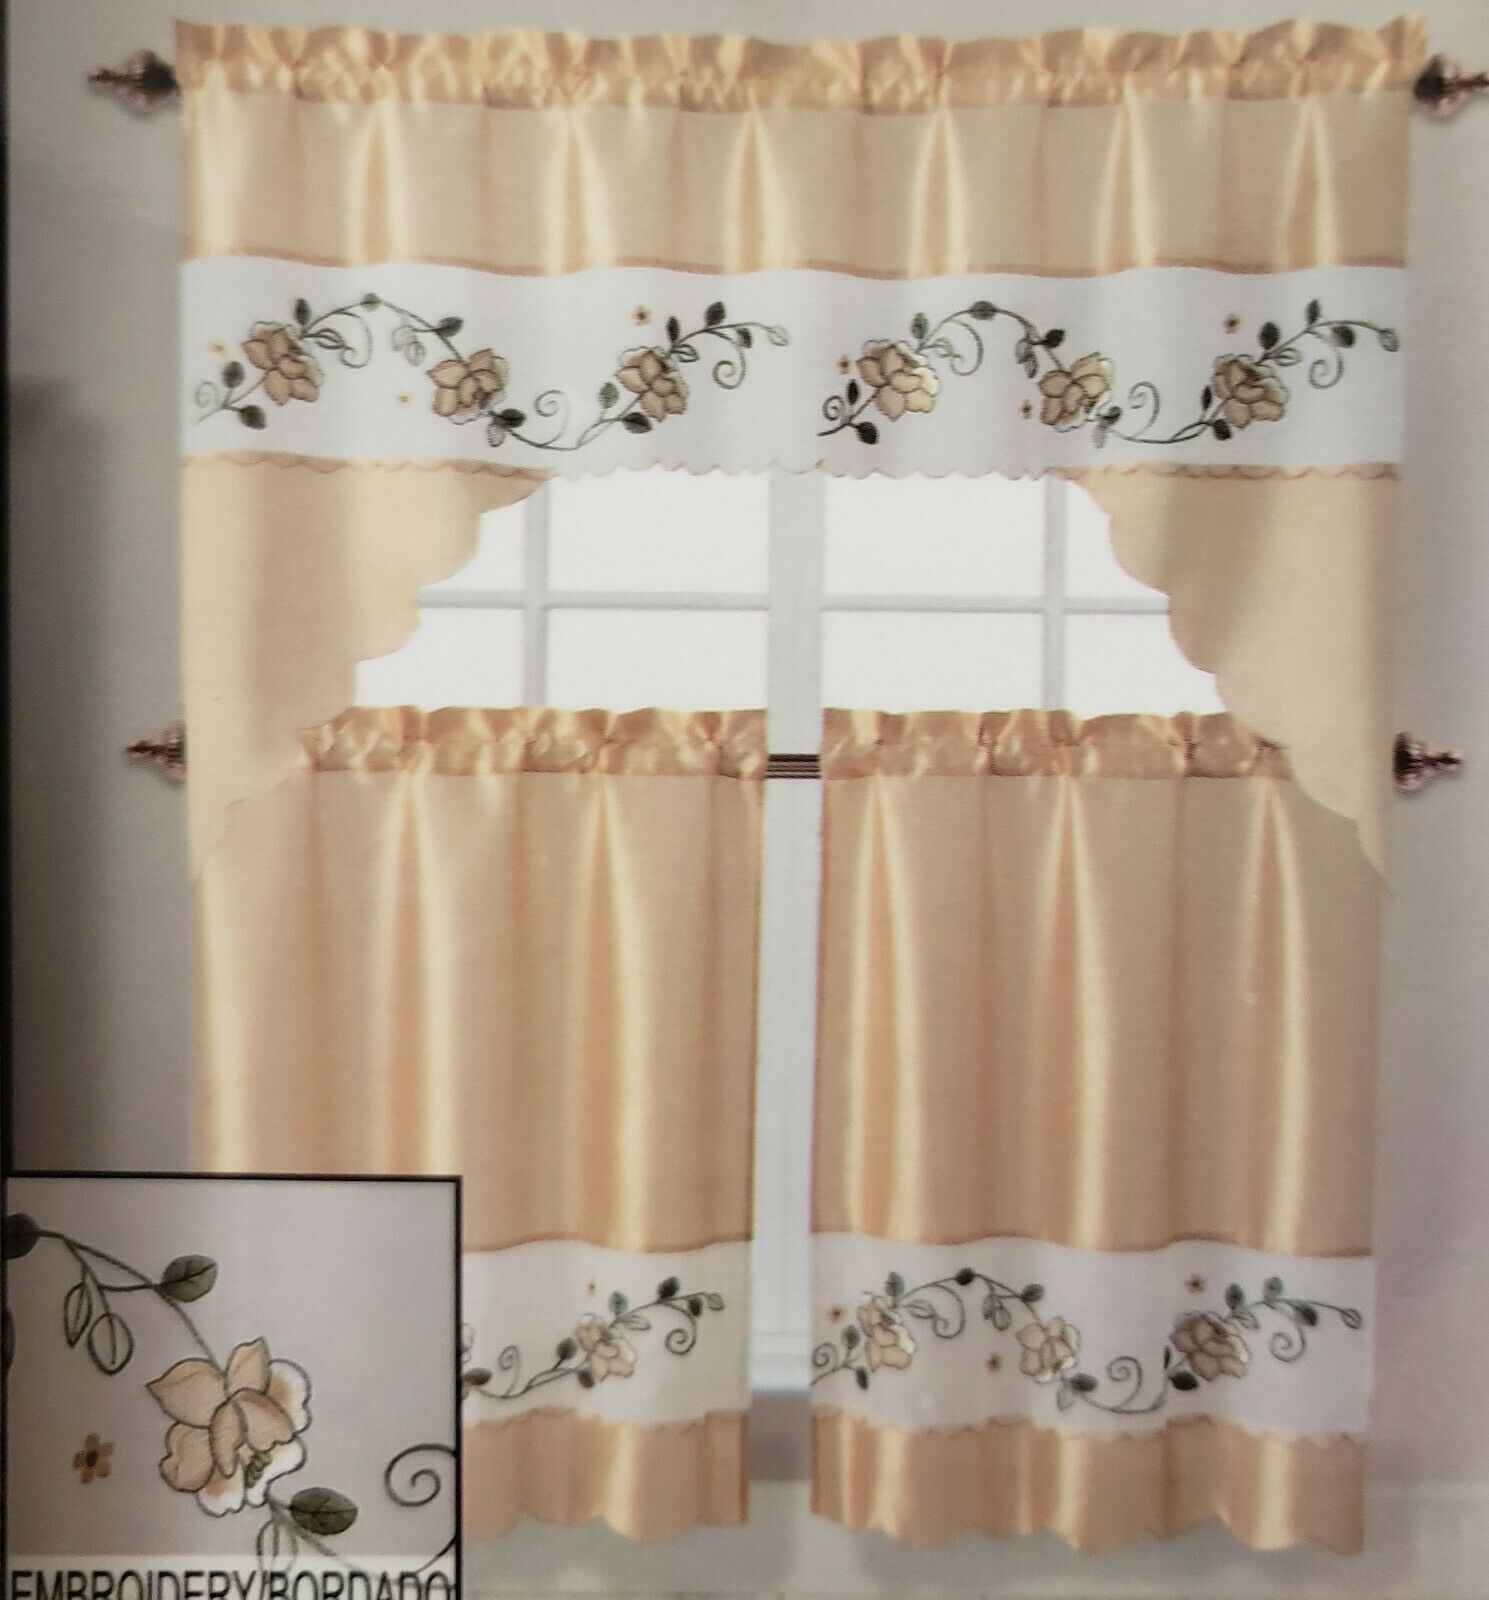 Primary image for 3pc. Embroidery Curtains Set:2 Tiers 28"x36" & Valance (57"x36") LIZZY FLOWER,VC